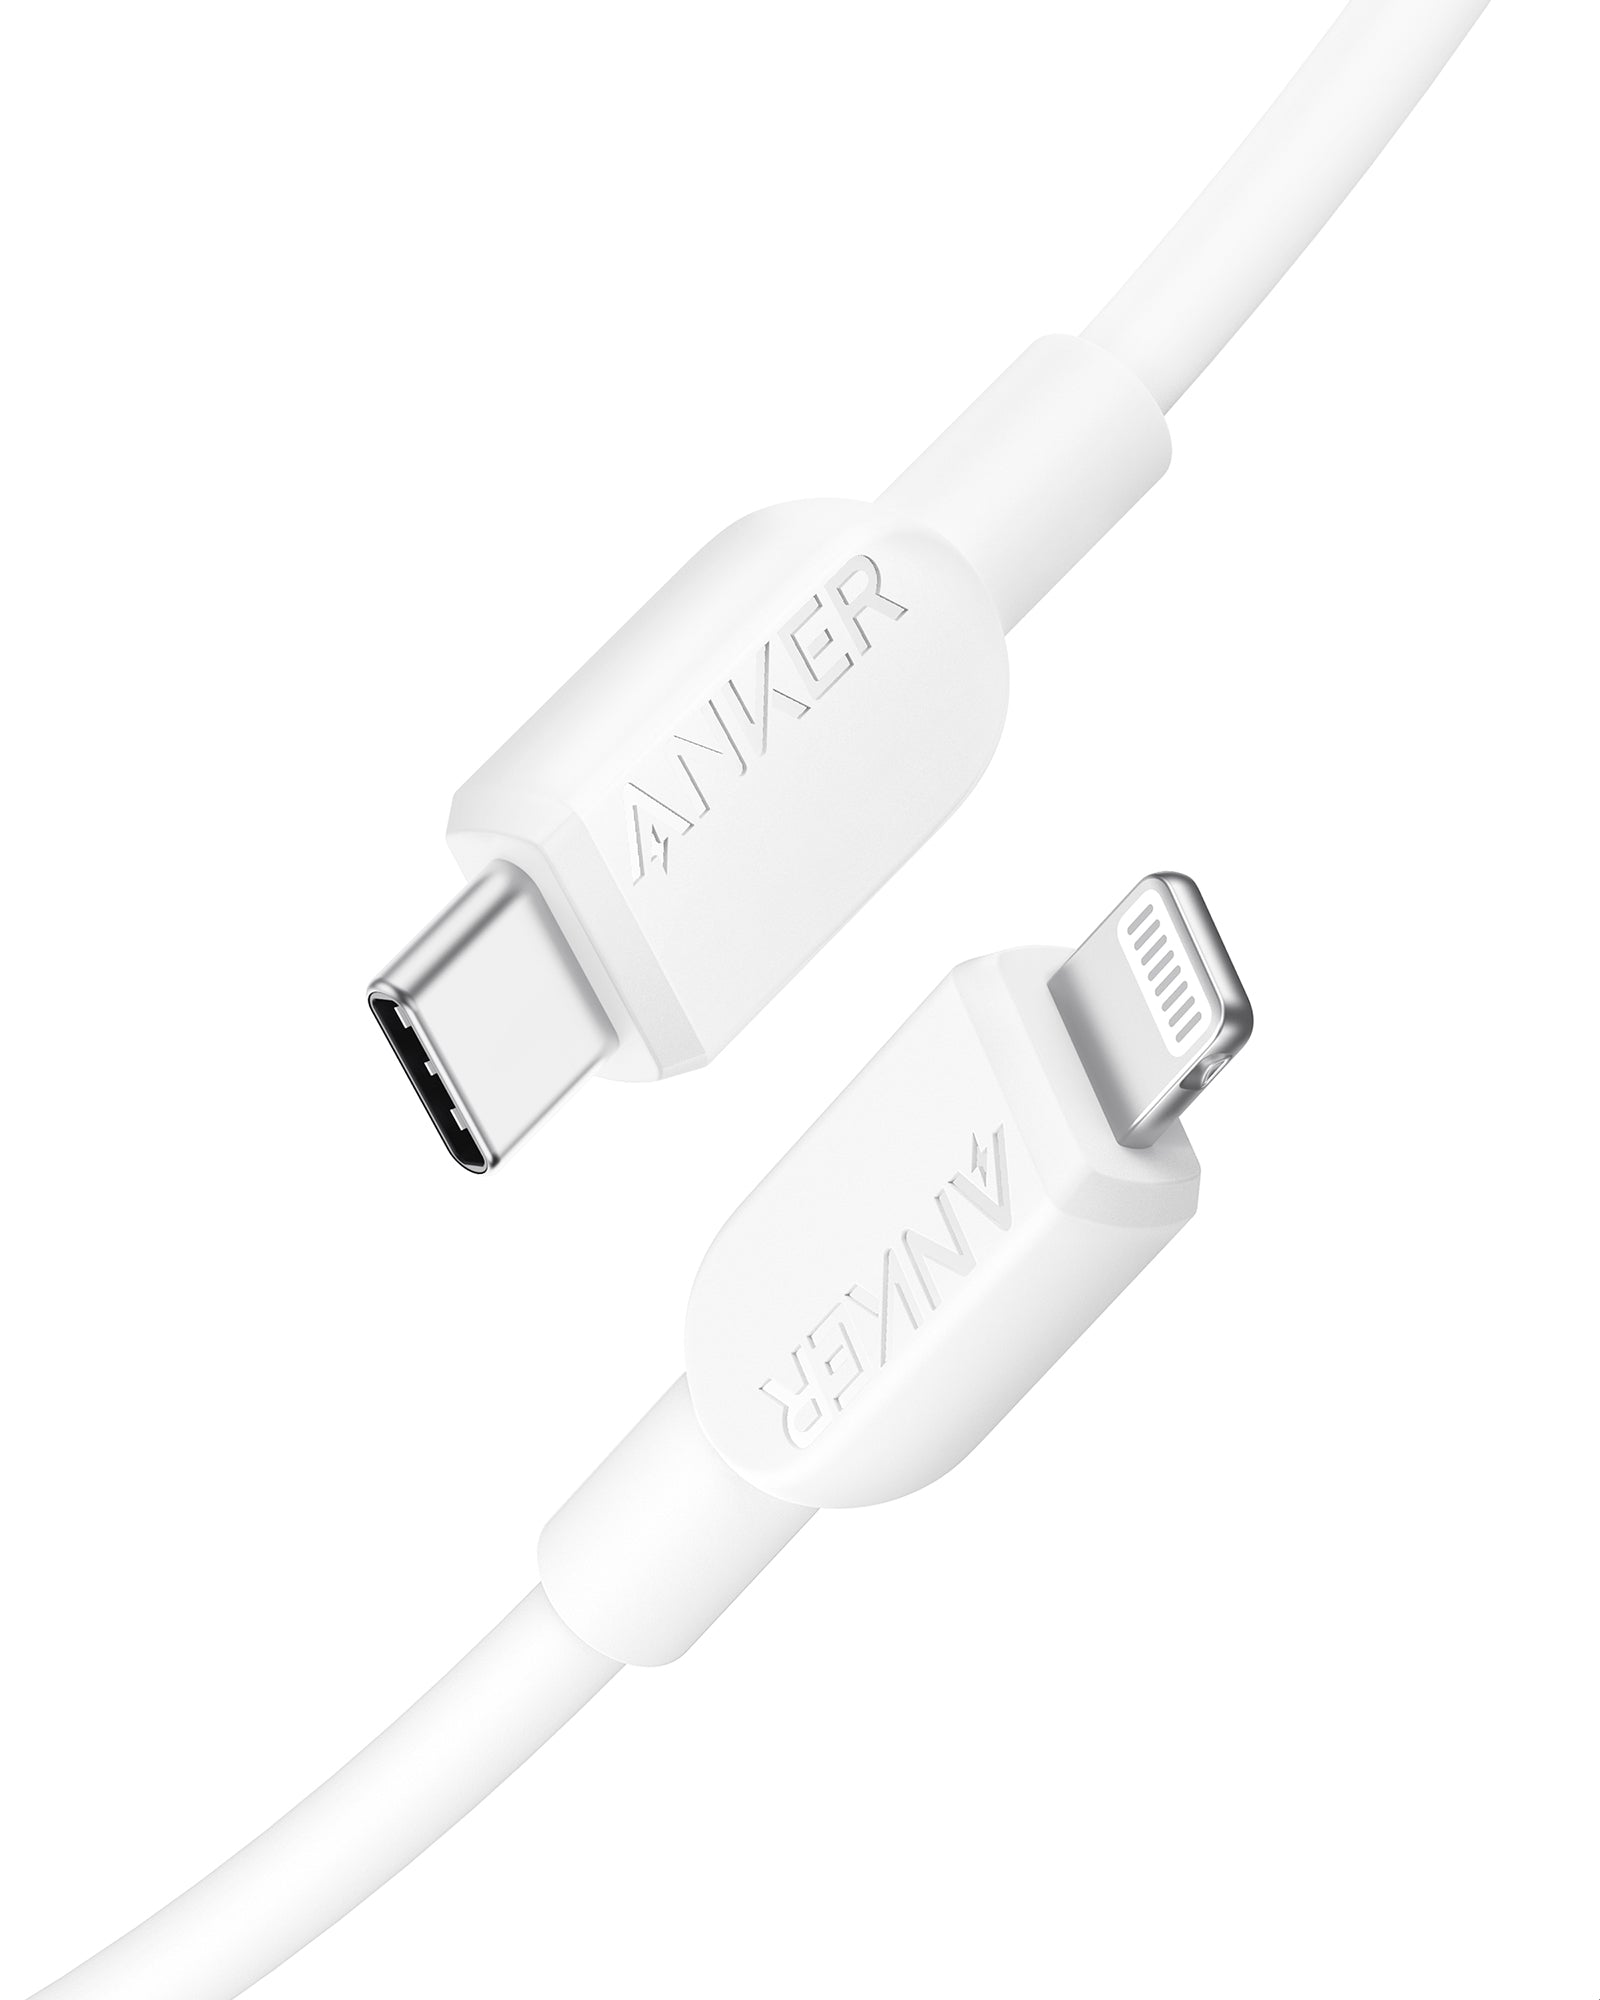 Anker USB C 323 Charger (33W) USB C to Lightning Cable